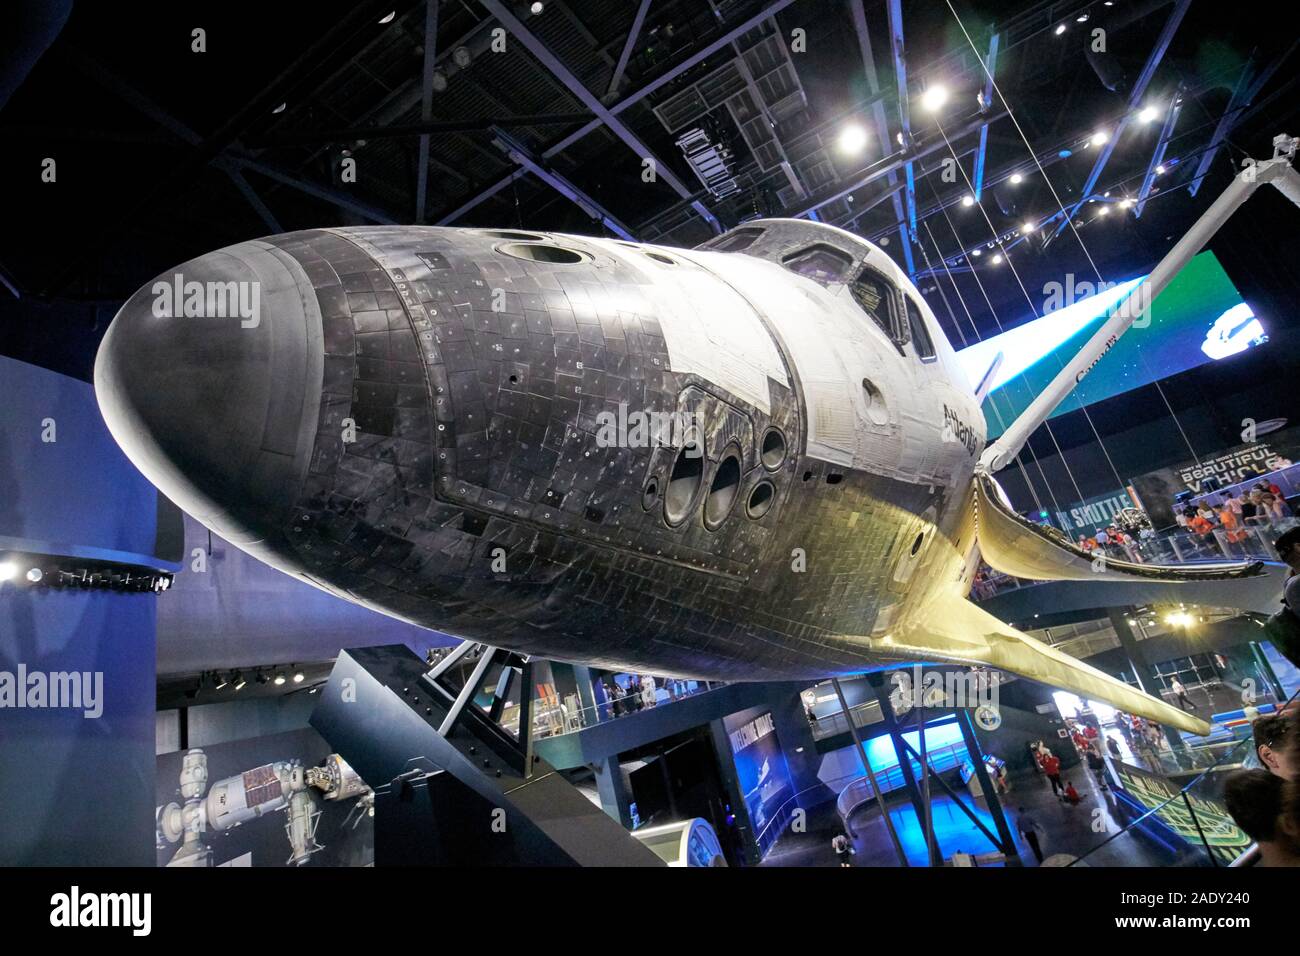 space shuttle atlantis on display in the kennedy space center florida usa Stock Photo